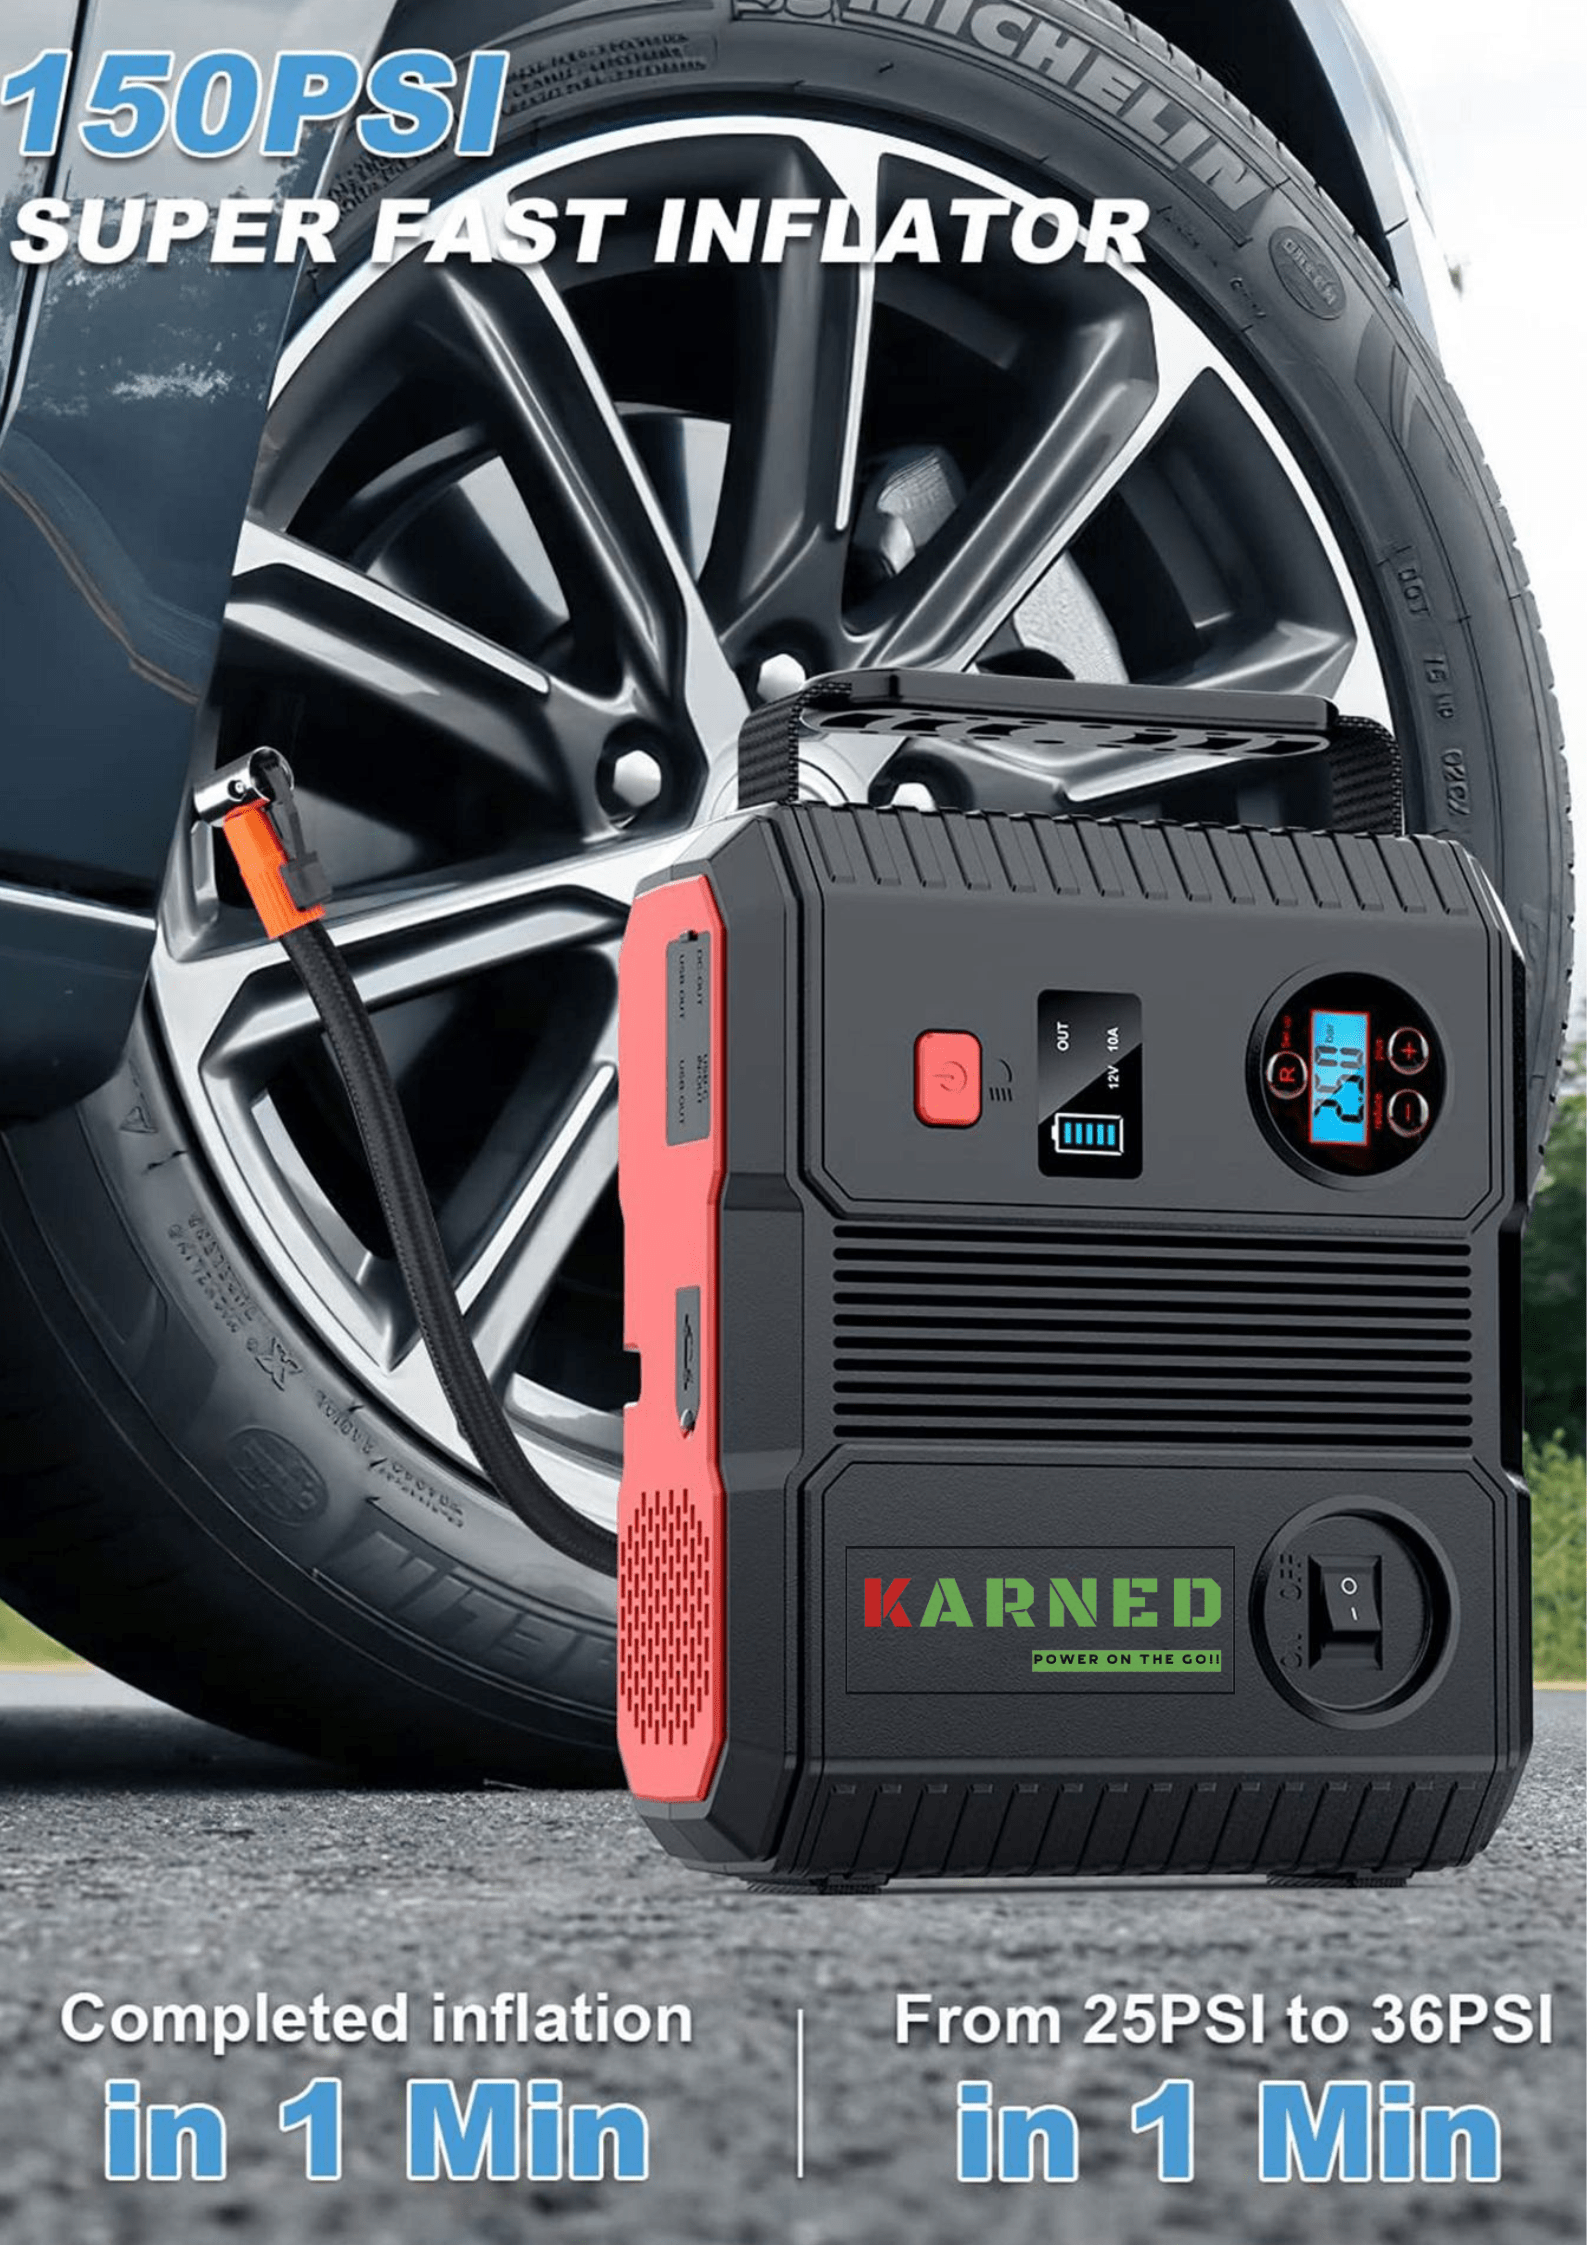 2 In 1 Car Jump Starter Power Bank With Air Compressor Tire Pump